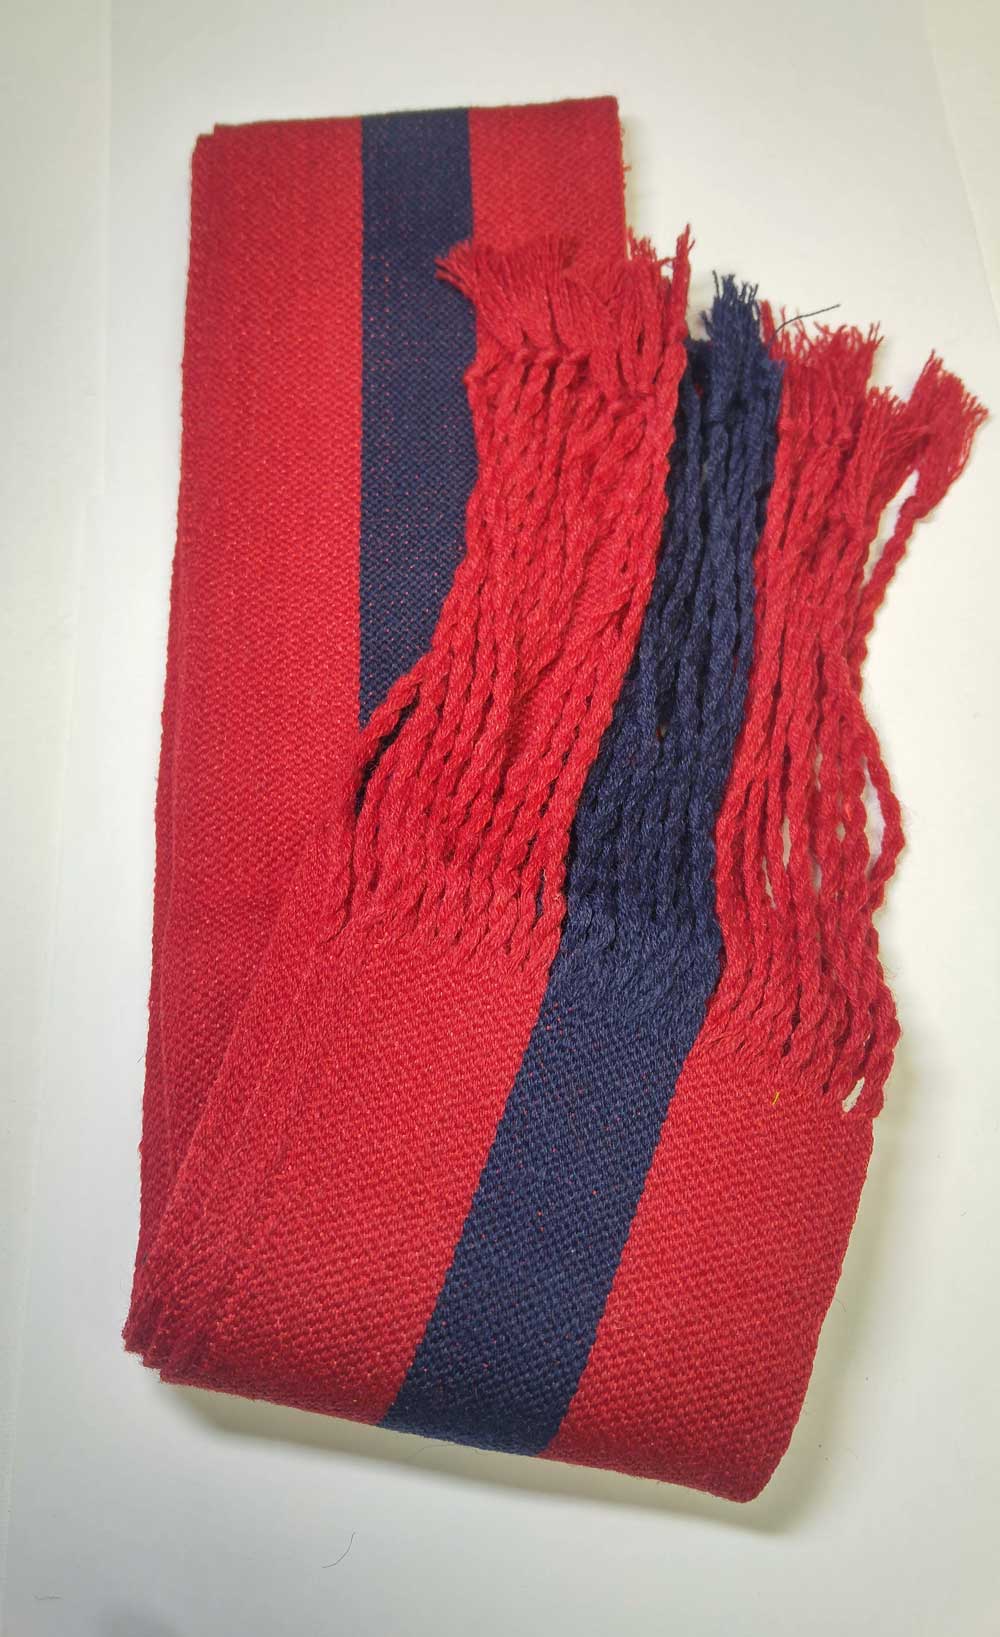 Sash: Sgt., Red with Blue Stripe, 18/19C